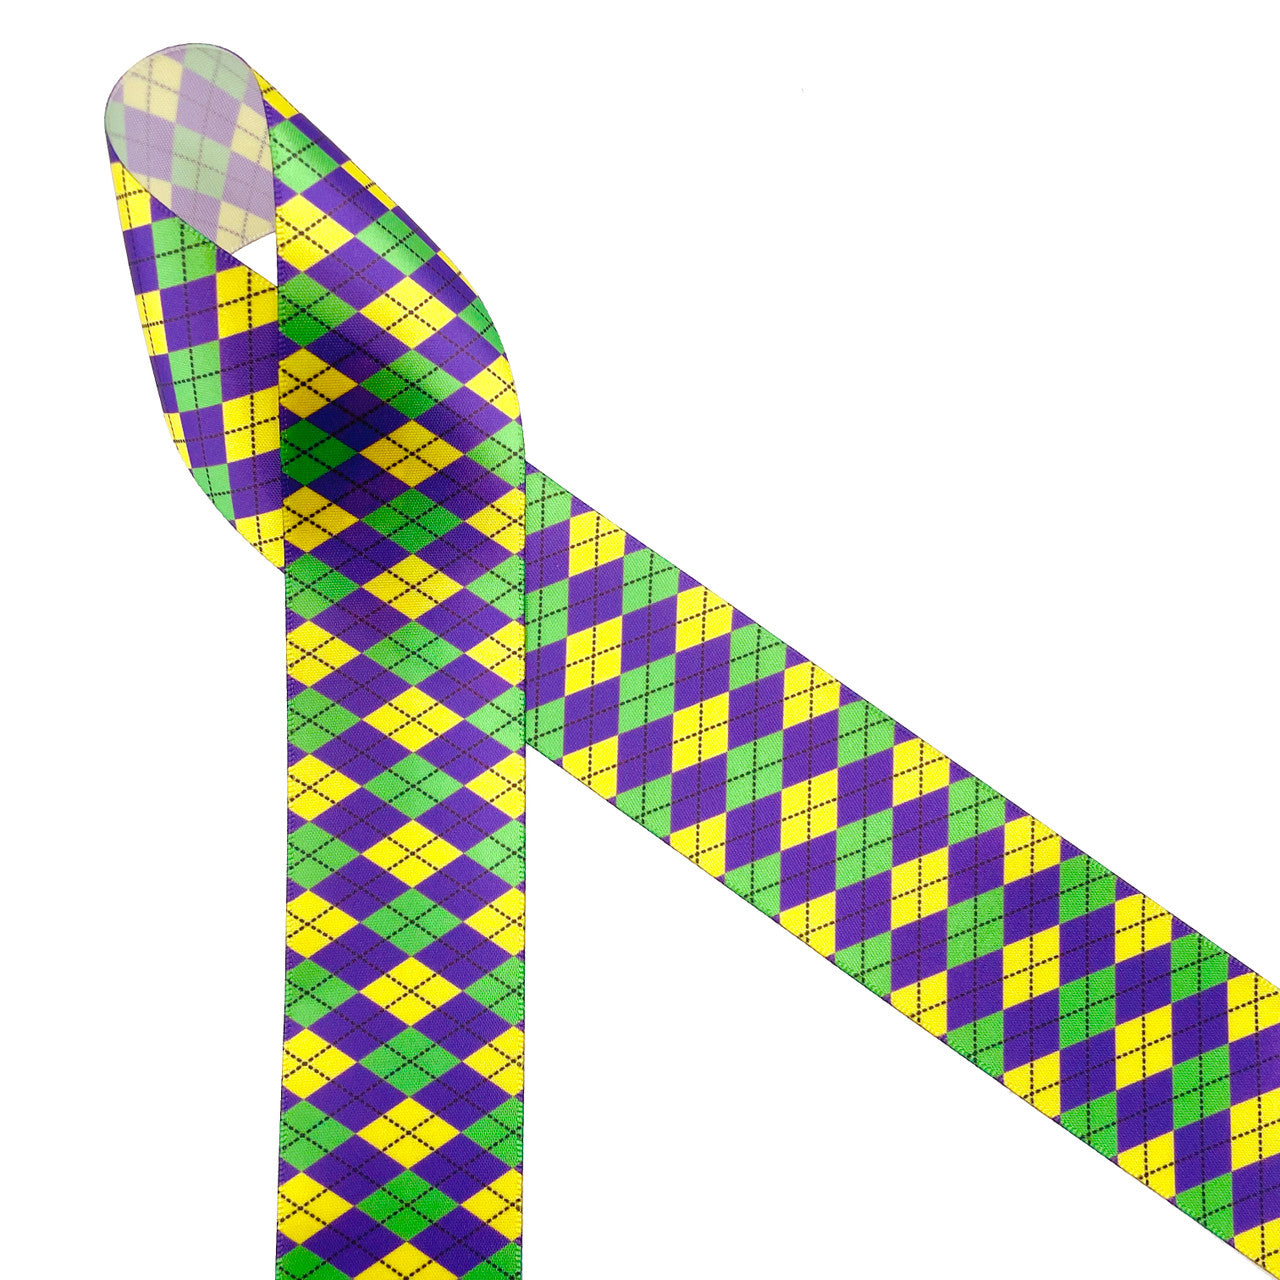 Mardi Gras themed argyle ribbon in yellow, purple and green printed on 1.5" white single face satin ribbon is ideal for celebrating Mardi Gras is so many ways! This ribbon is perfect for gift wrapping those King Cakes, gift baskets, party decor, floral design, and table scapes. Use this ribbon for Mardi Gras themed crafts, wreath making, sewing and quilting projects too. All our ribbon is designed and printed in the USA